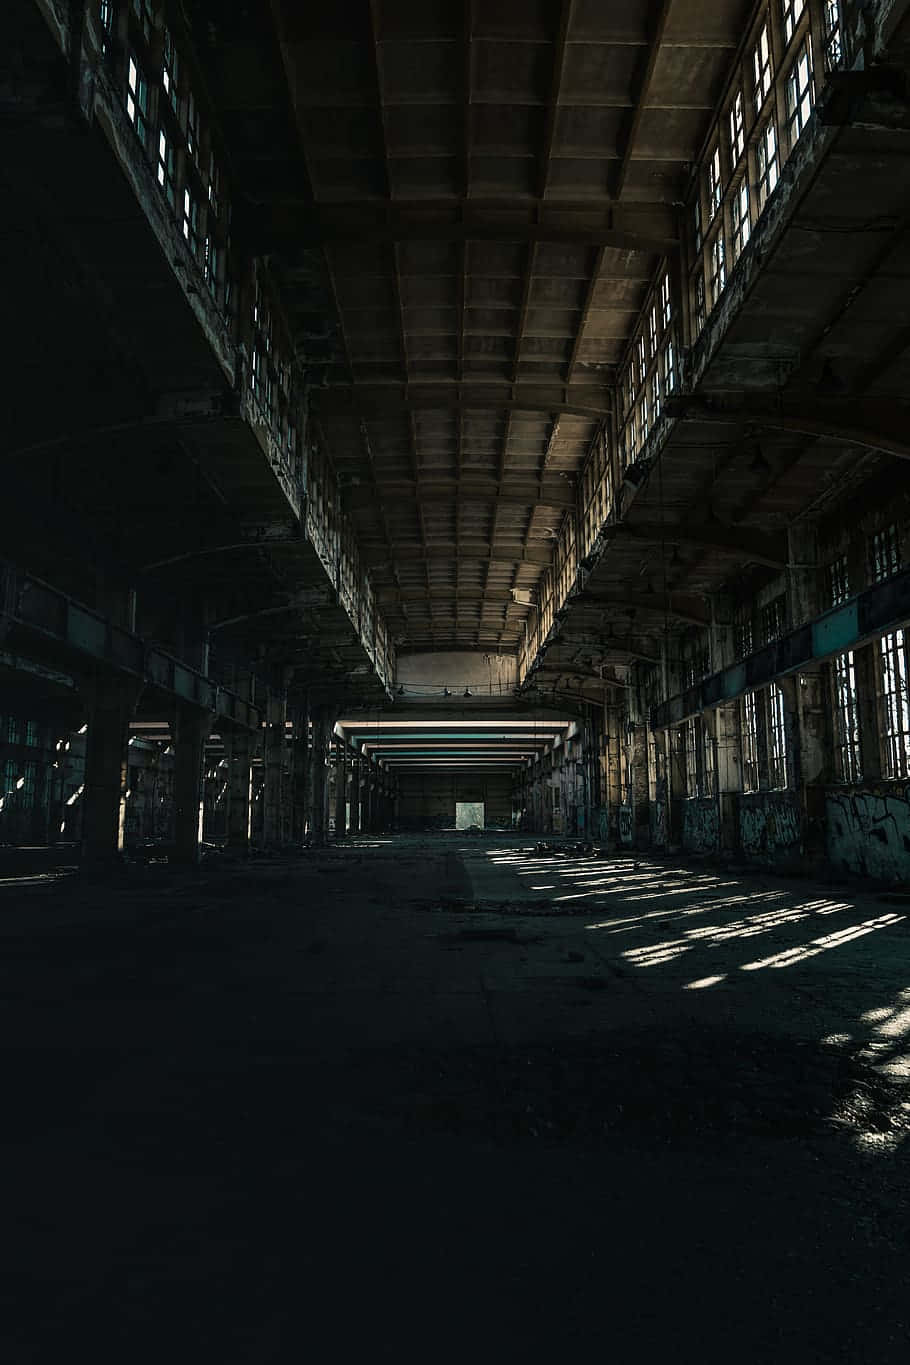 An Empty Warehouse With Windows